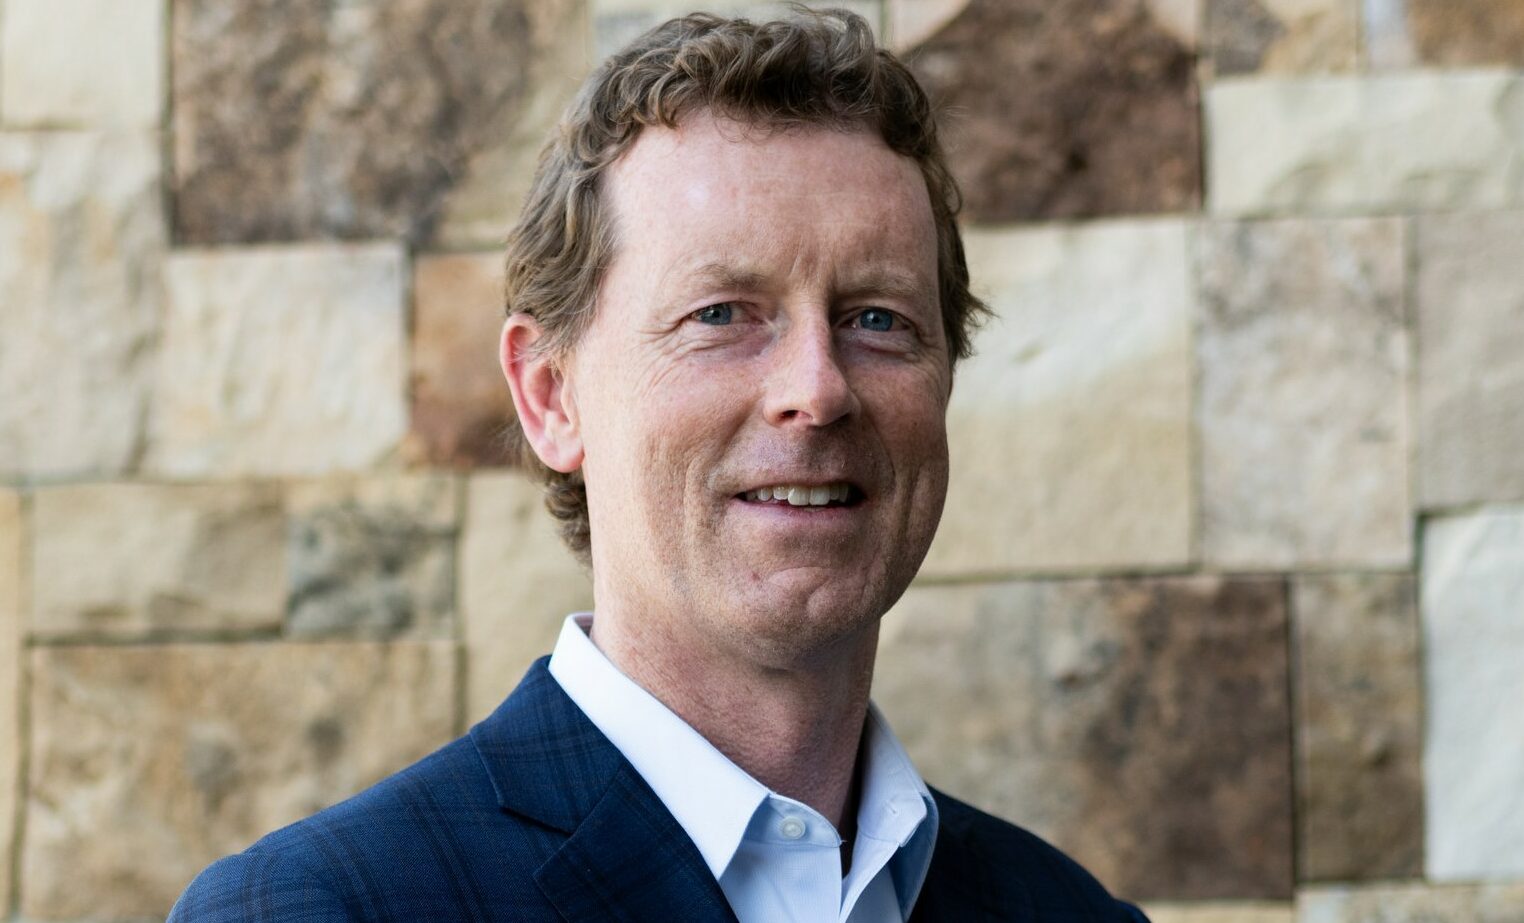 Paul Reitz – CEO and President